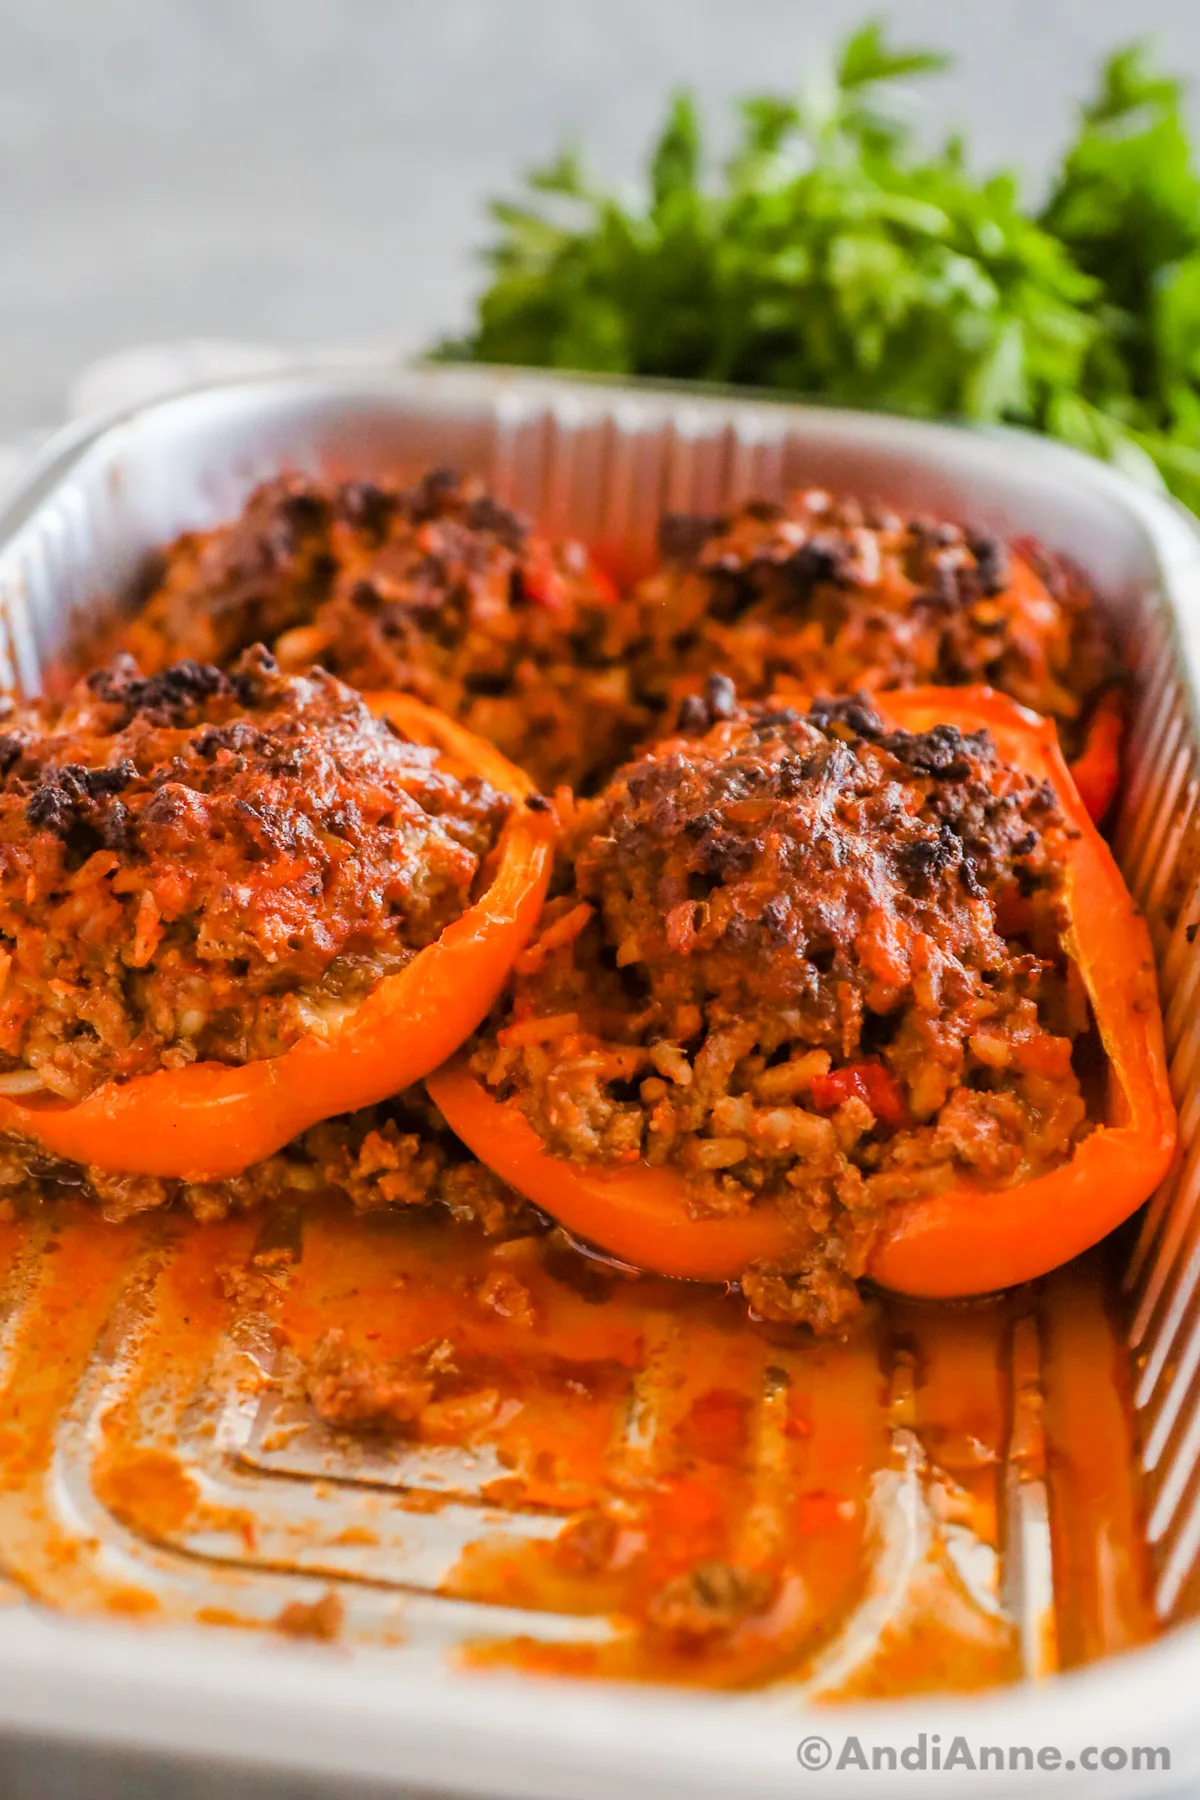 Baked stuffed bell peppers in a foil tray.